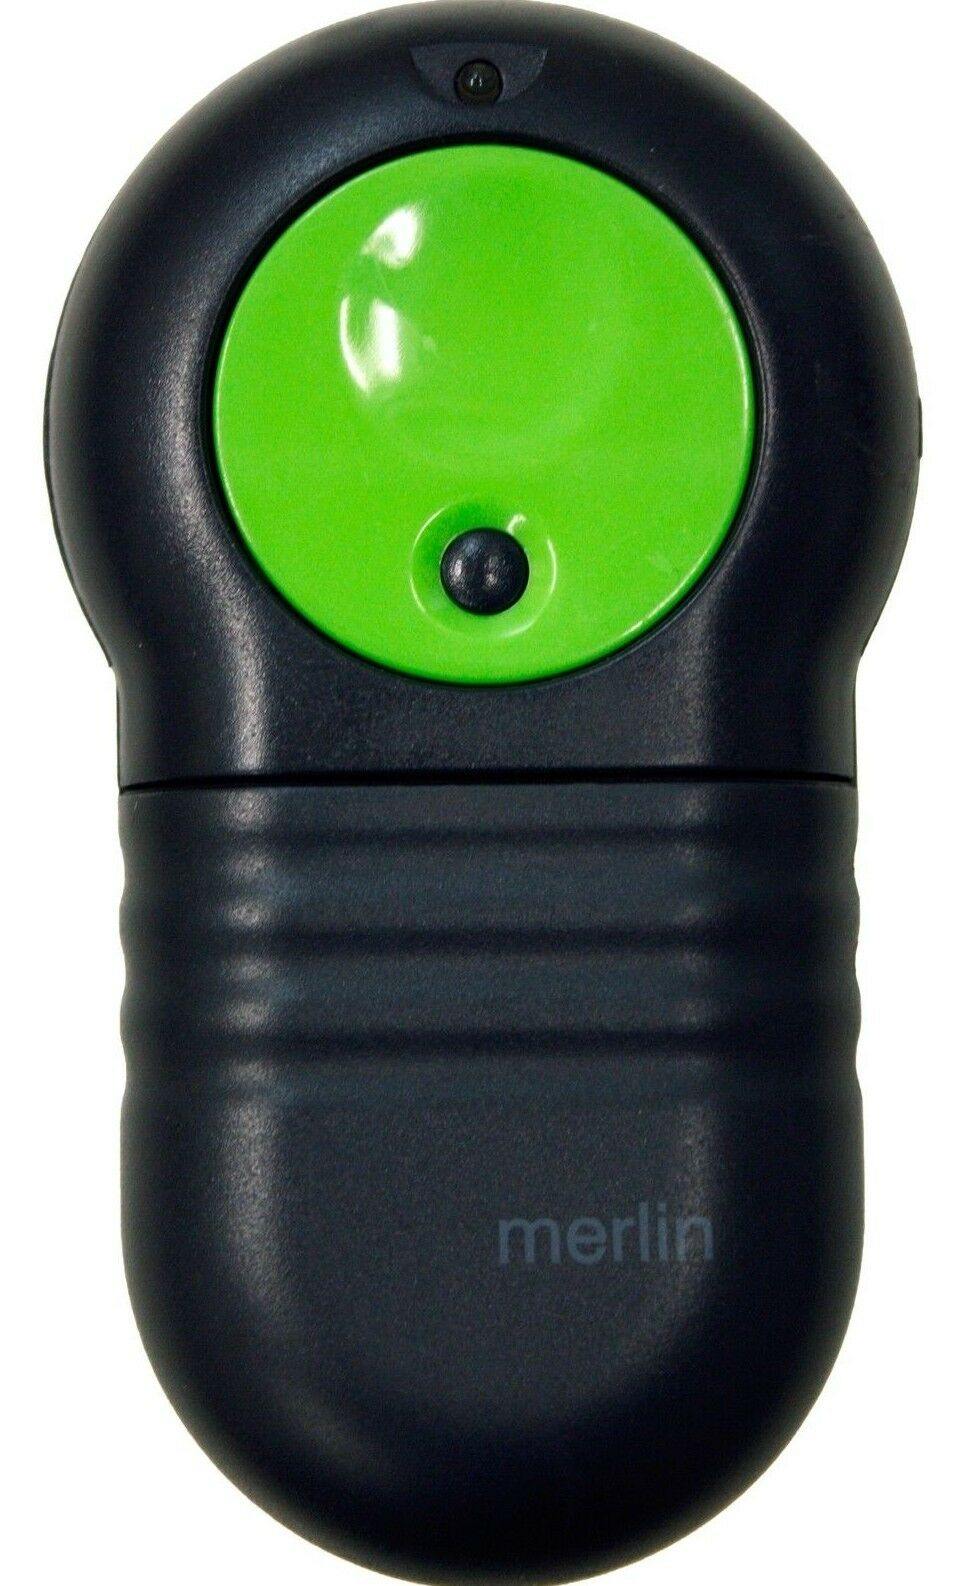 Merlin M832 Garage Remote - China Air Conditioner Remotes :: Cheapest AC Remote Solutions